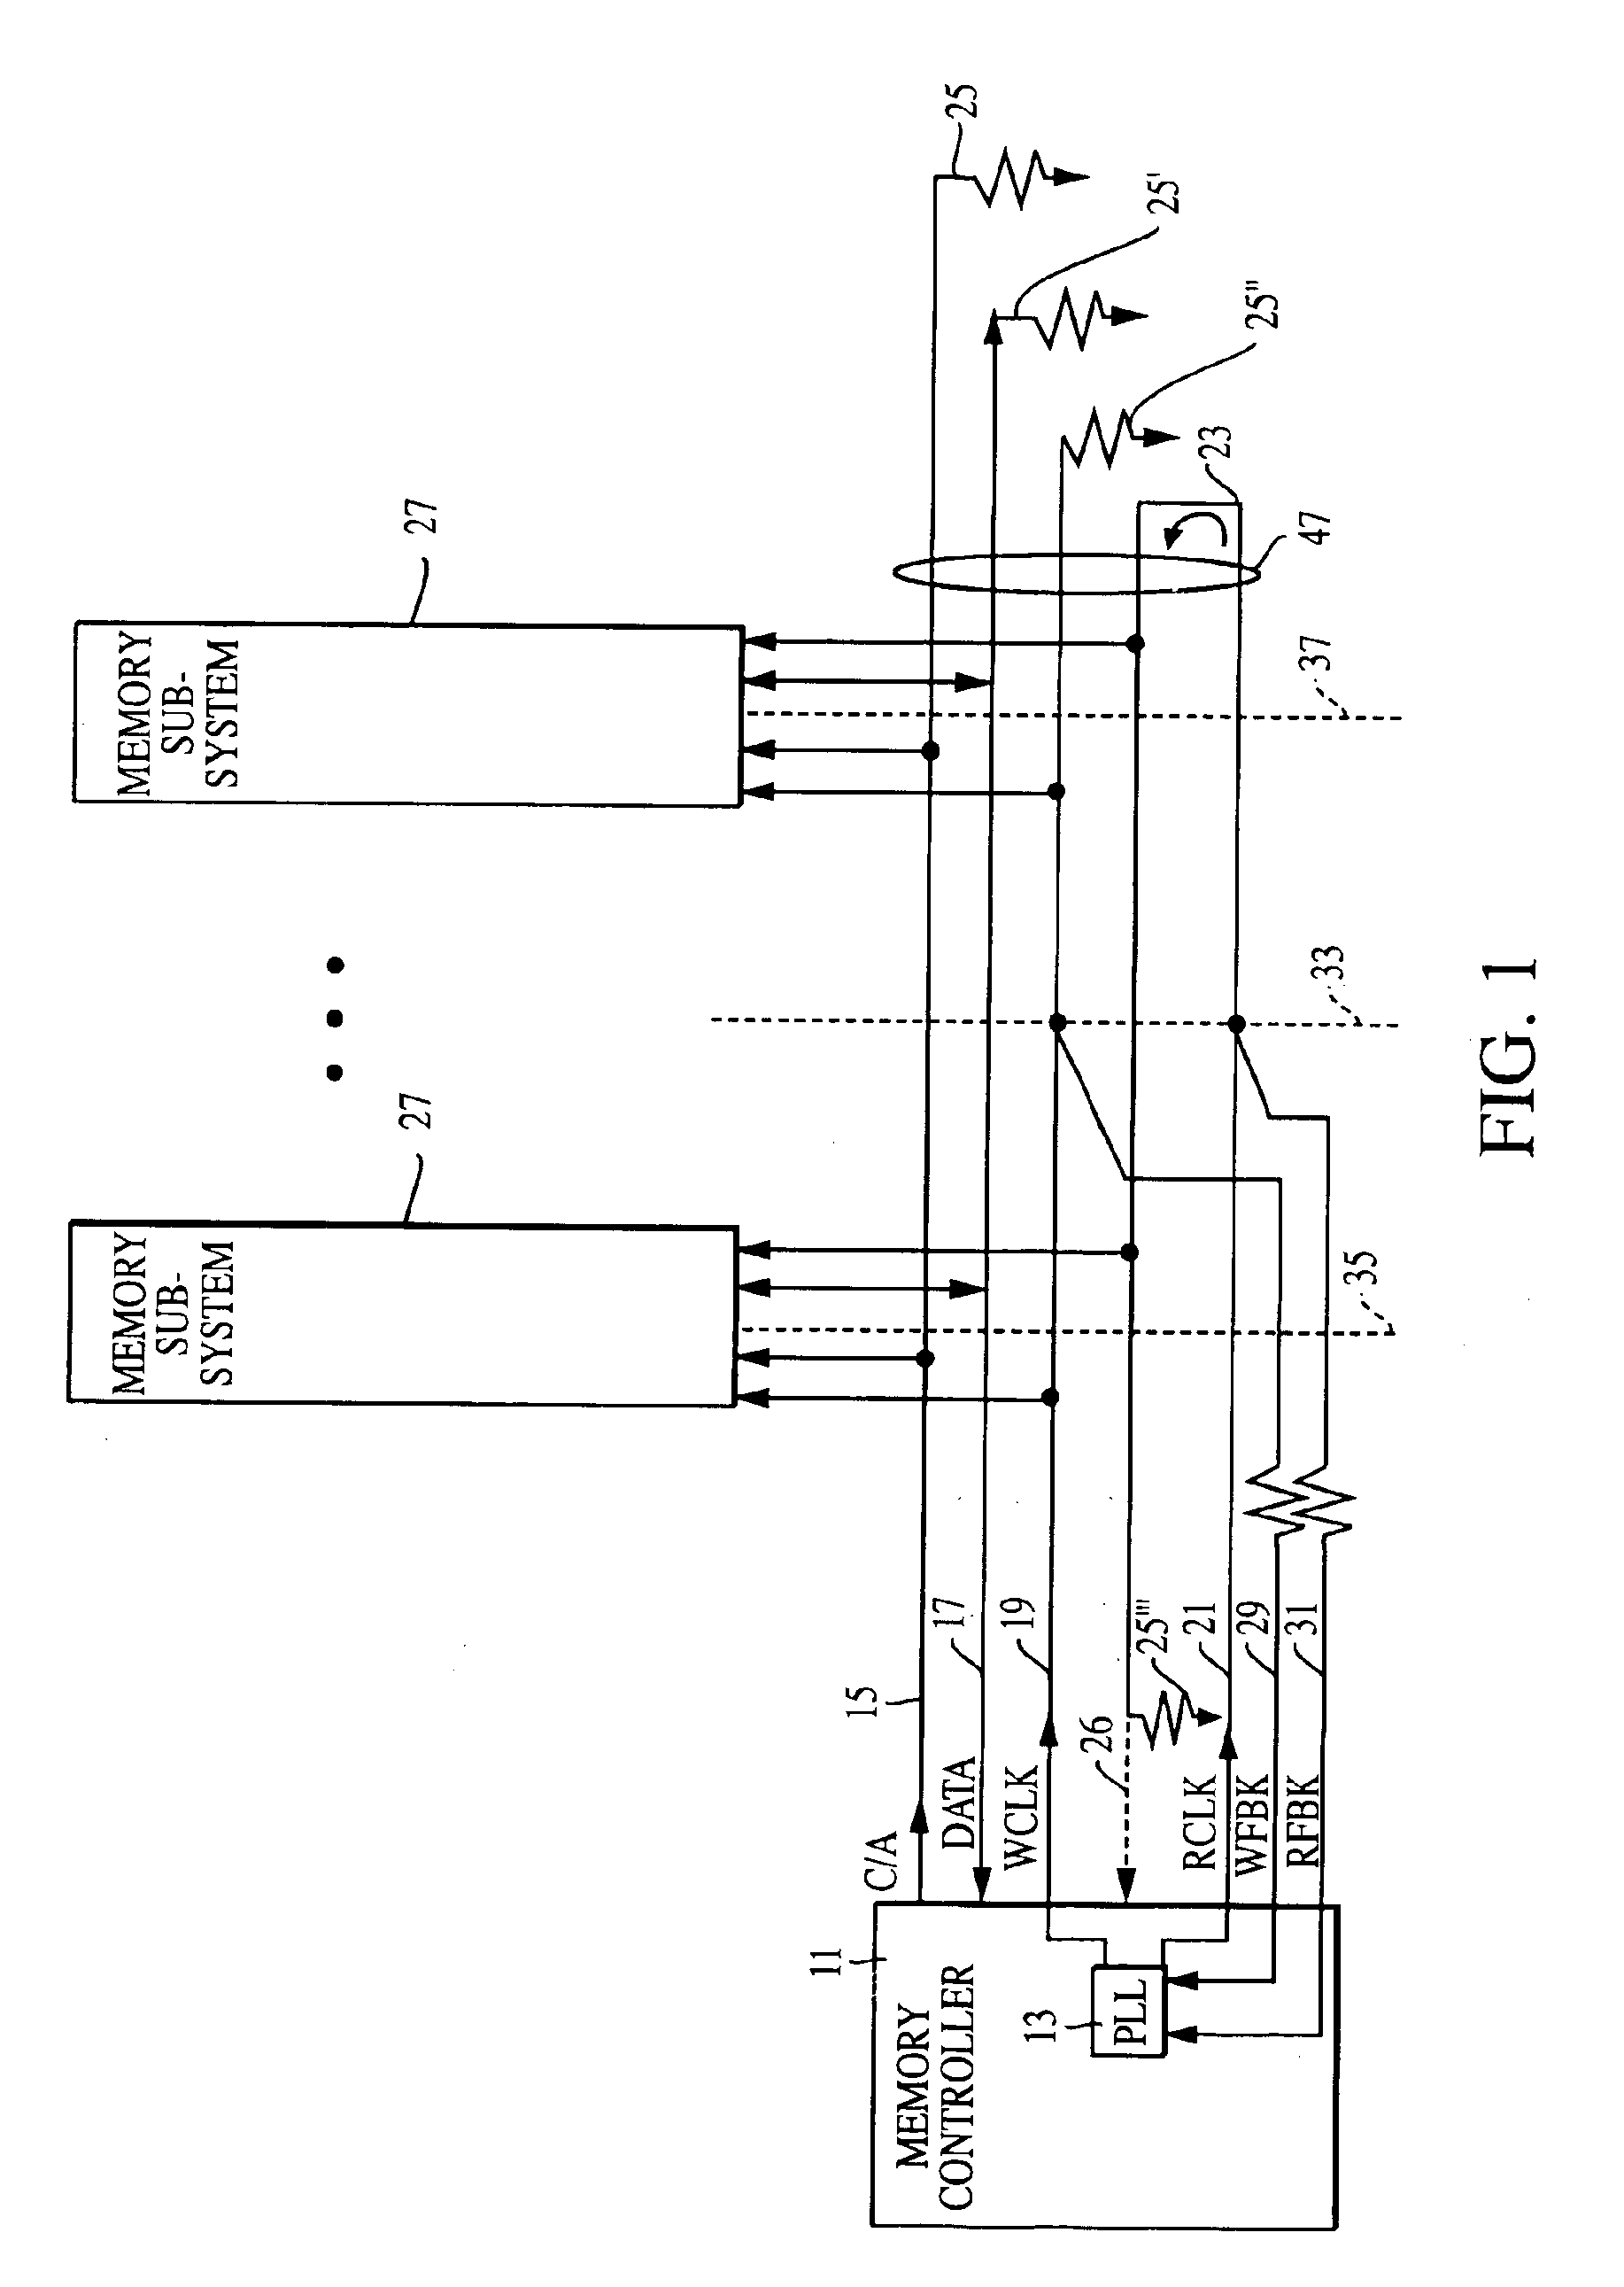 Memory system that sets a predetermined phase relationship between read and write clock signals at a bus midpoint for a plurality of spaced device locations